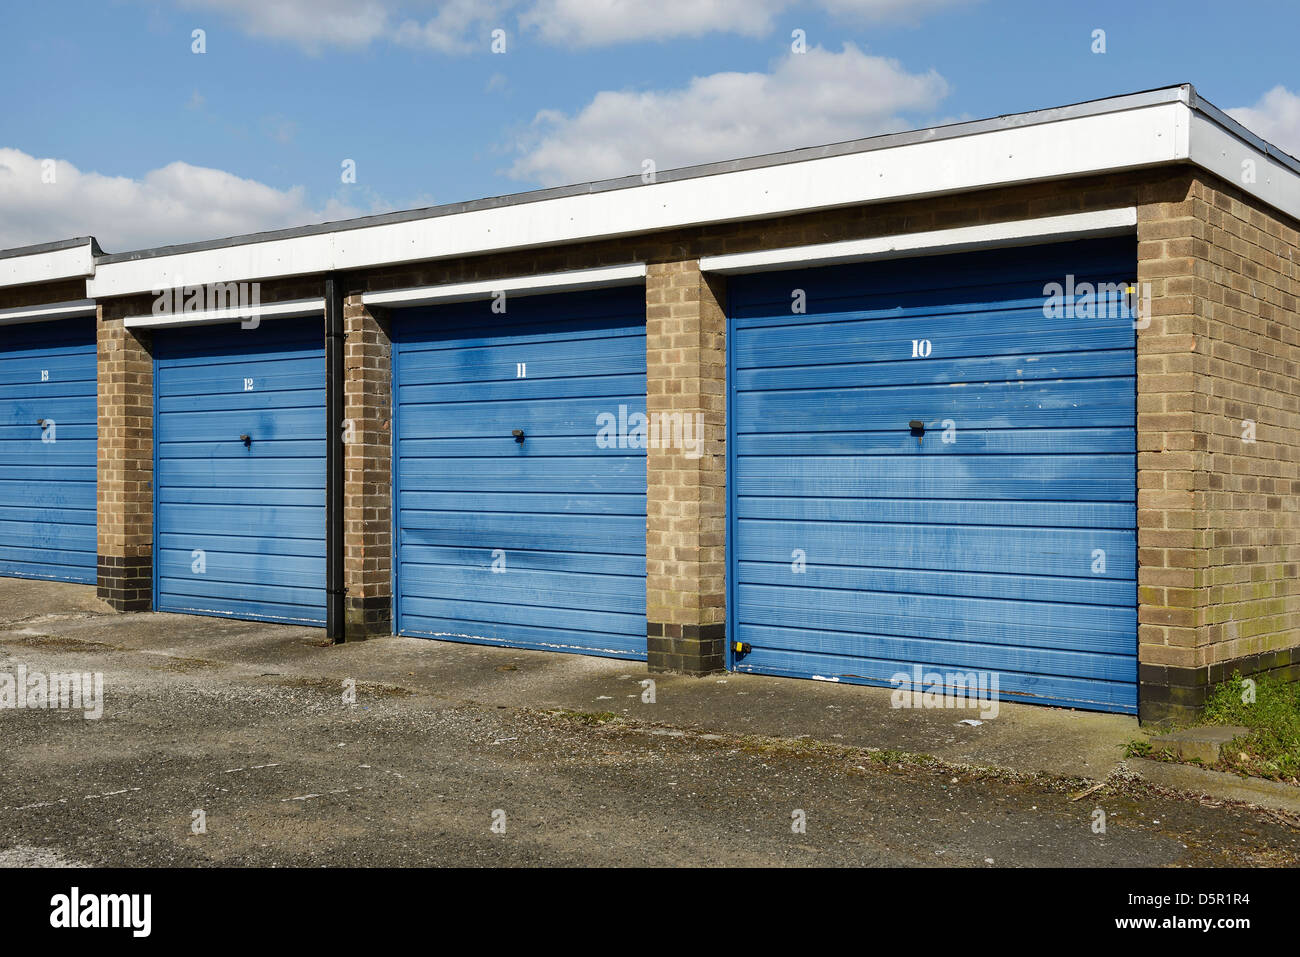 Row of single garages with blue doors Stock Photo